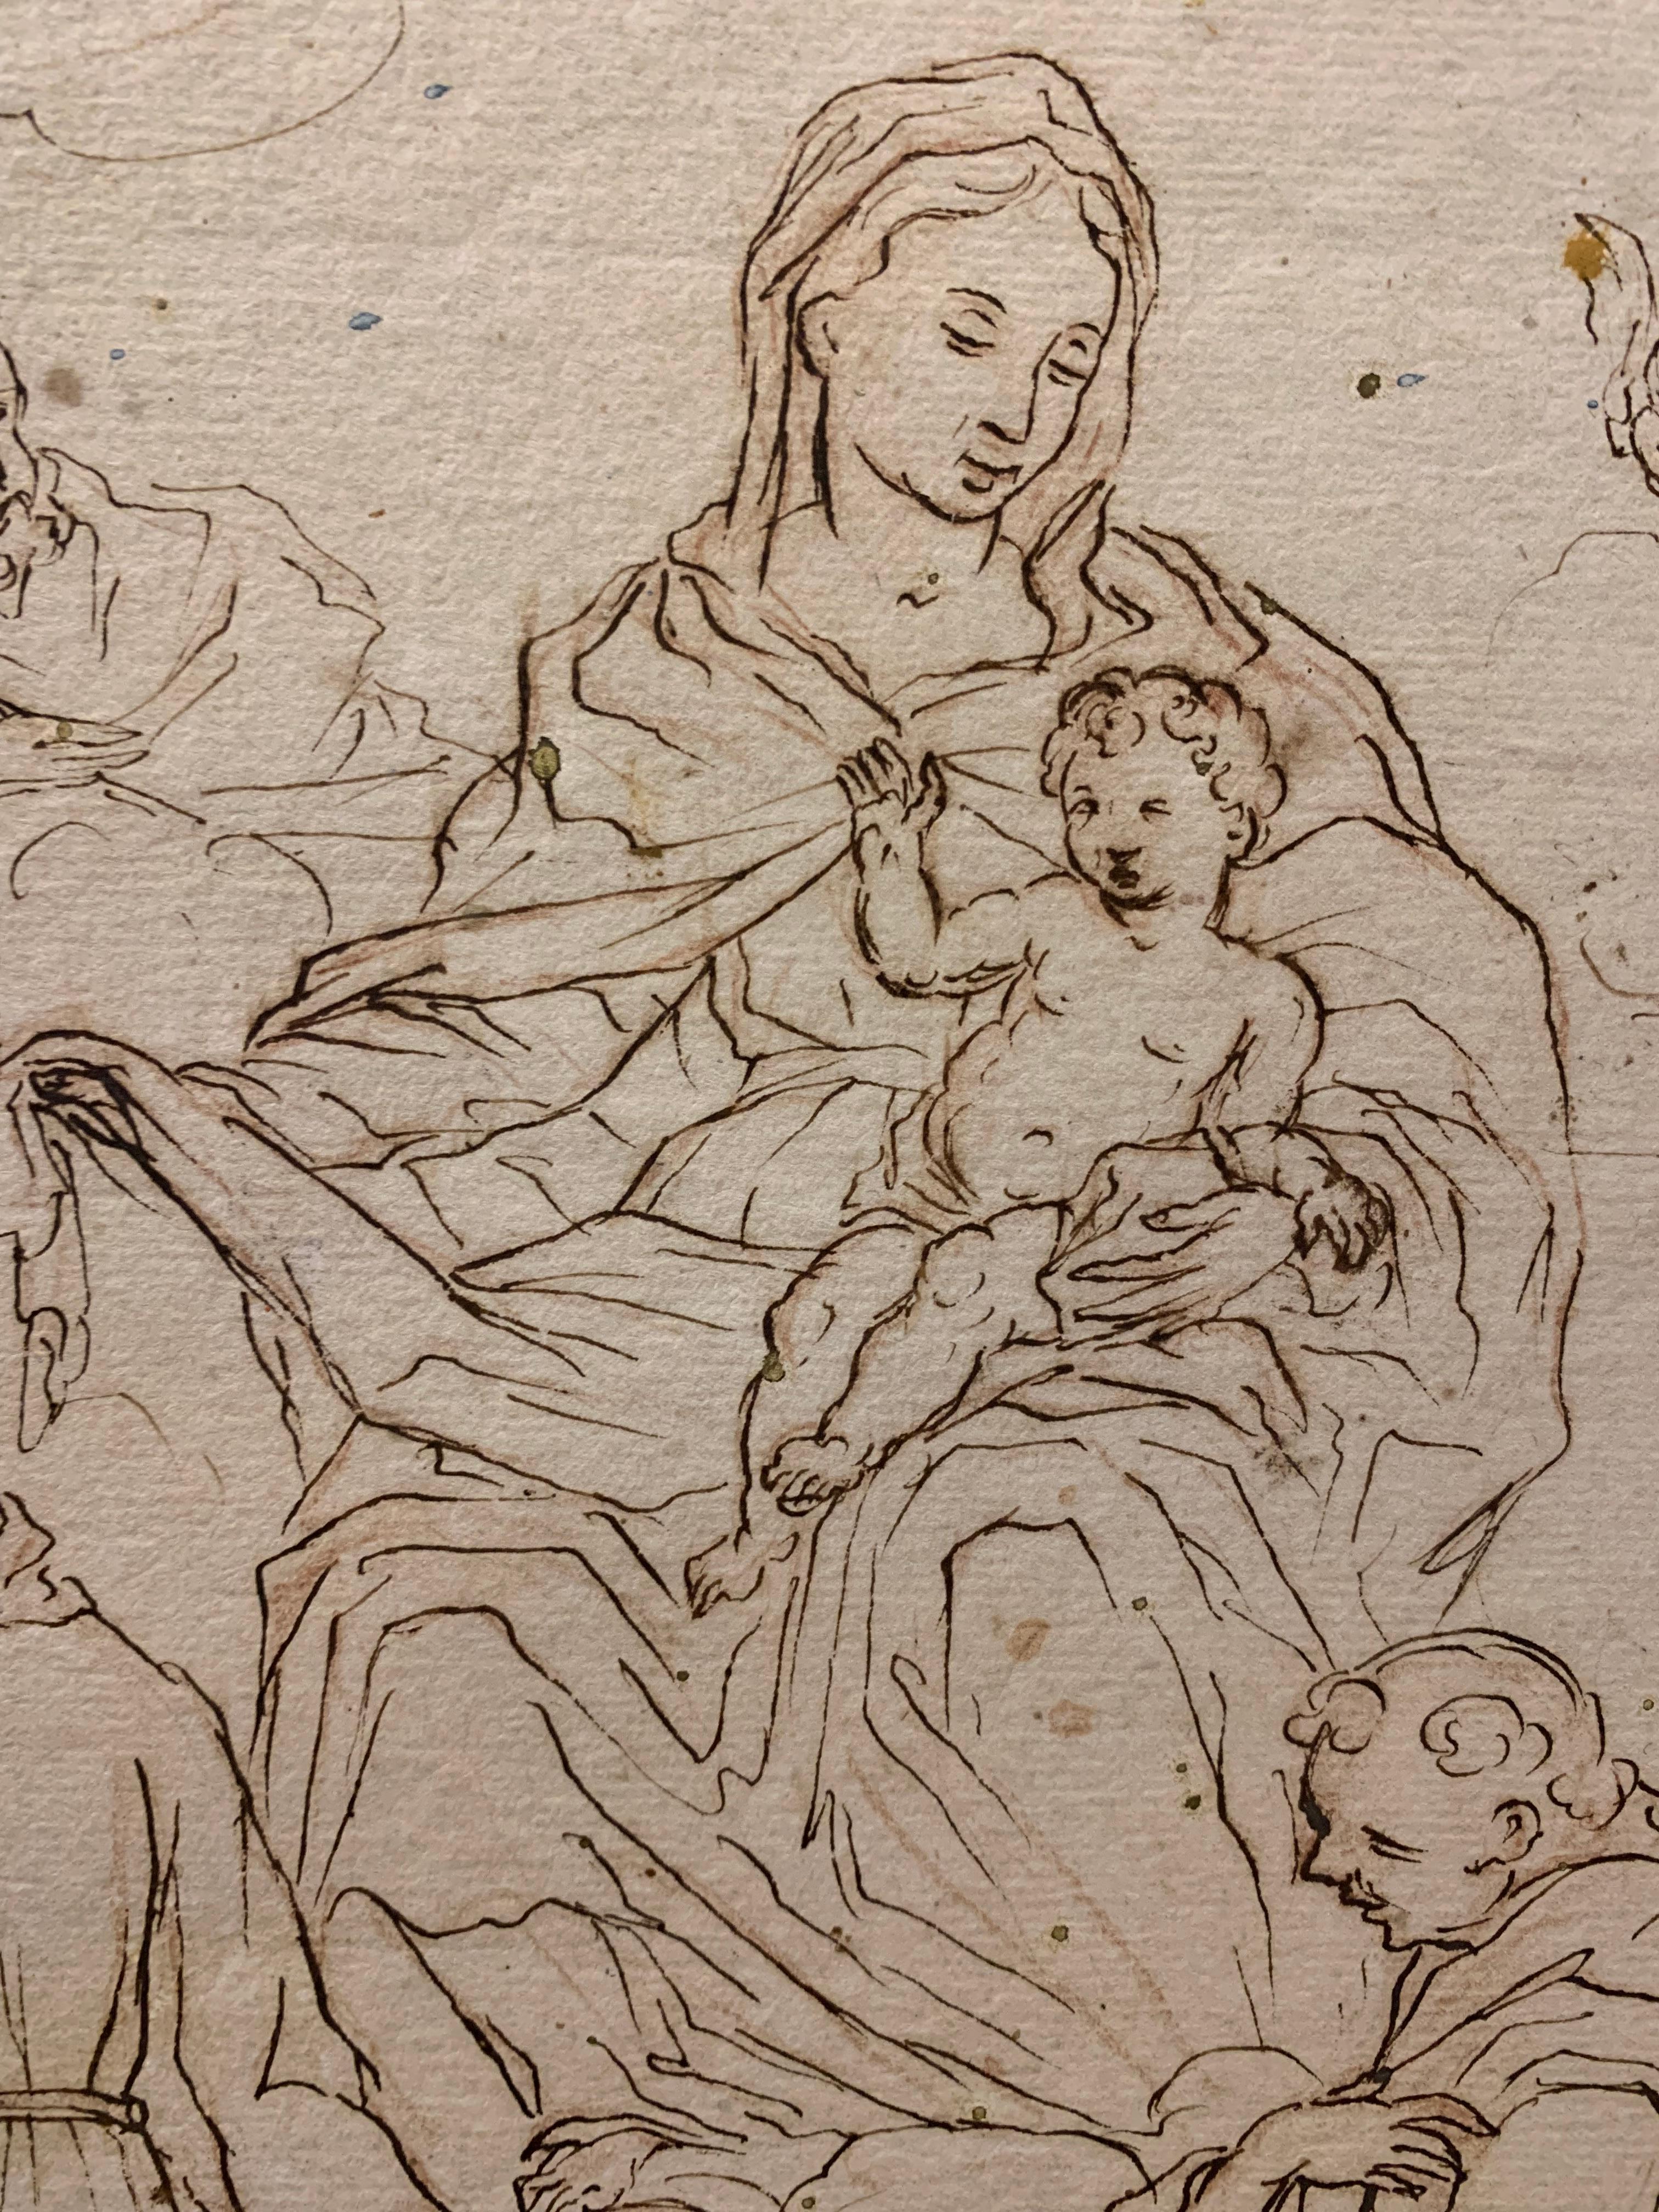 Madonna with Child, Saint Francis, Saint Anthony, and other Franciscan saints, 17th-18th century, antique drawing, Central Italian school.

Description: “Madonna with child surrounded by the Franciscan Saints, Saint Francis, Saint Anthony with a